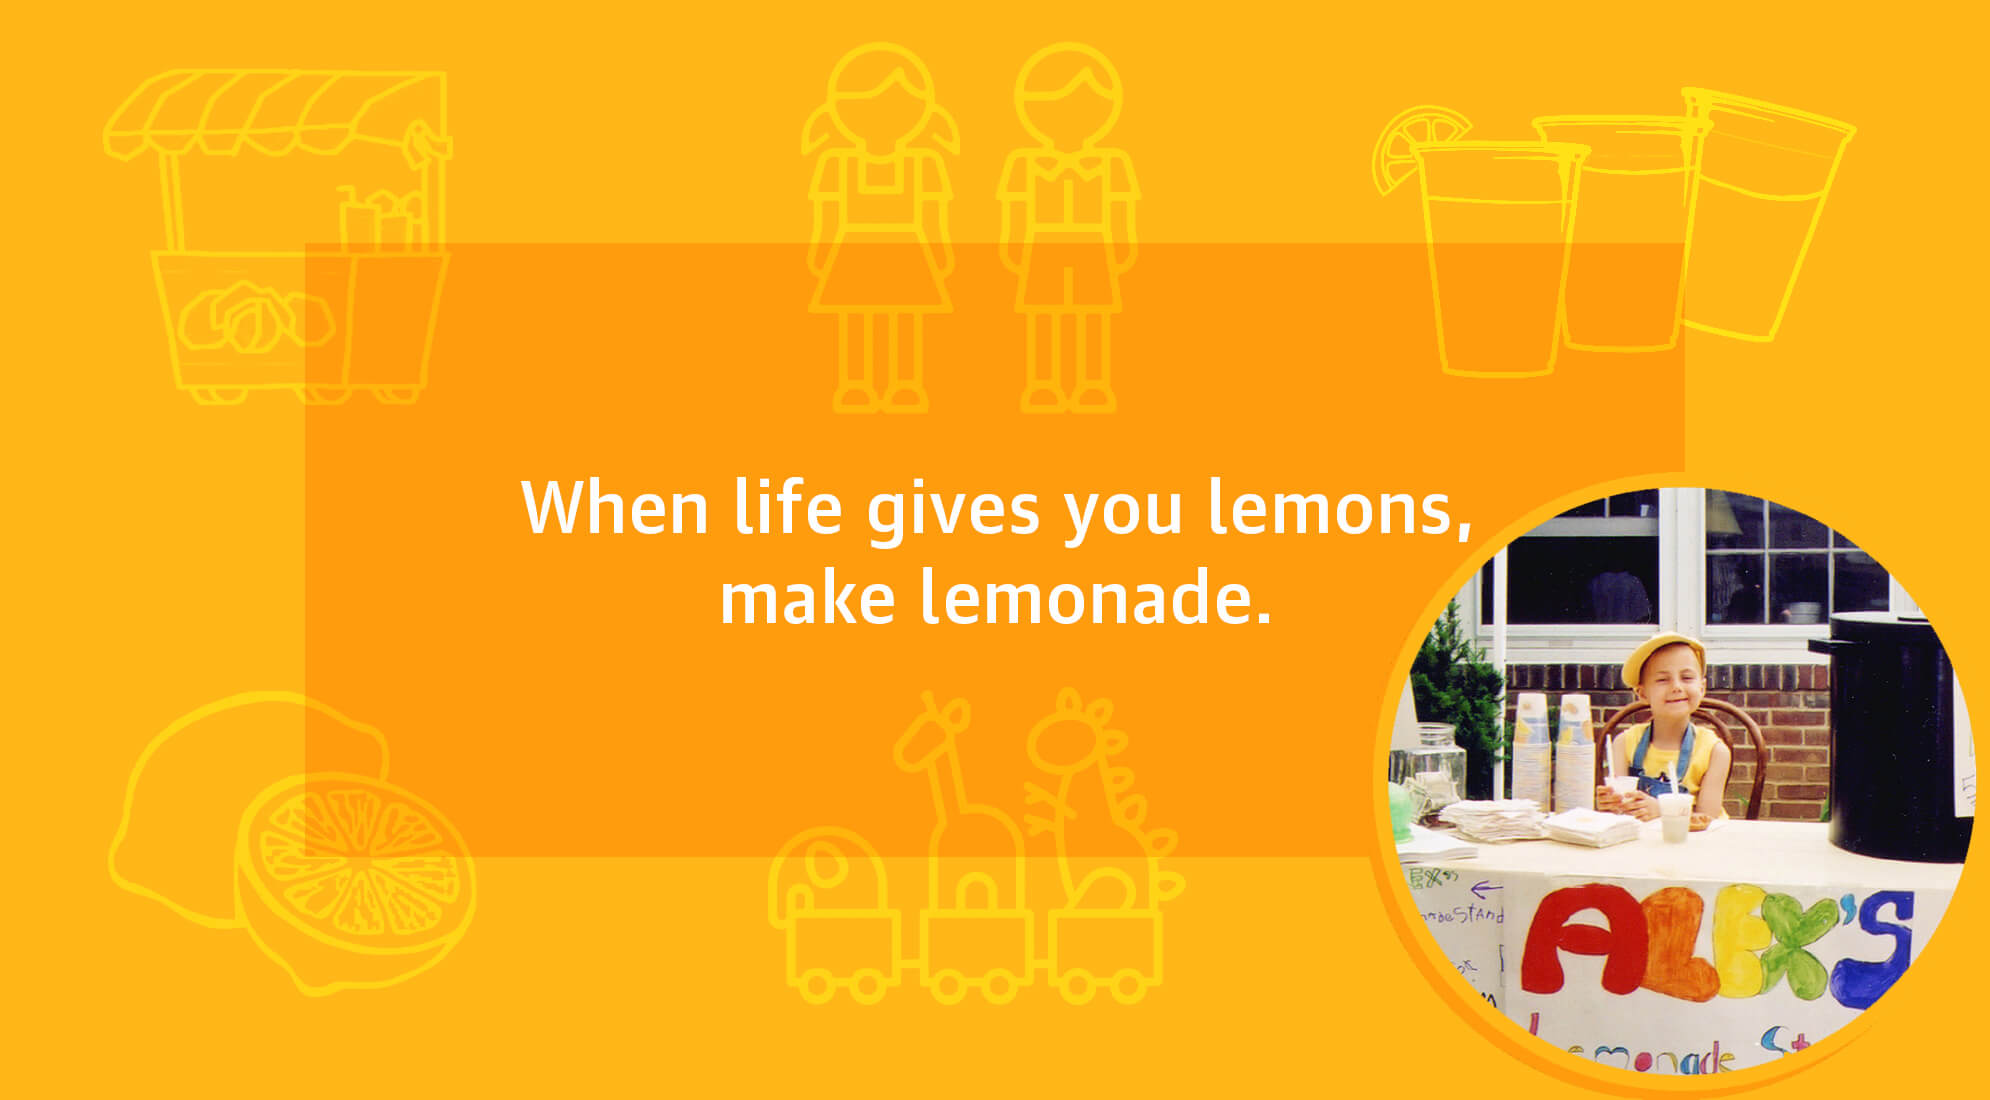 Fighting Childhood Cancer with Lemonade